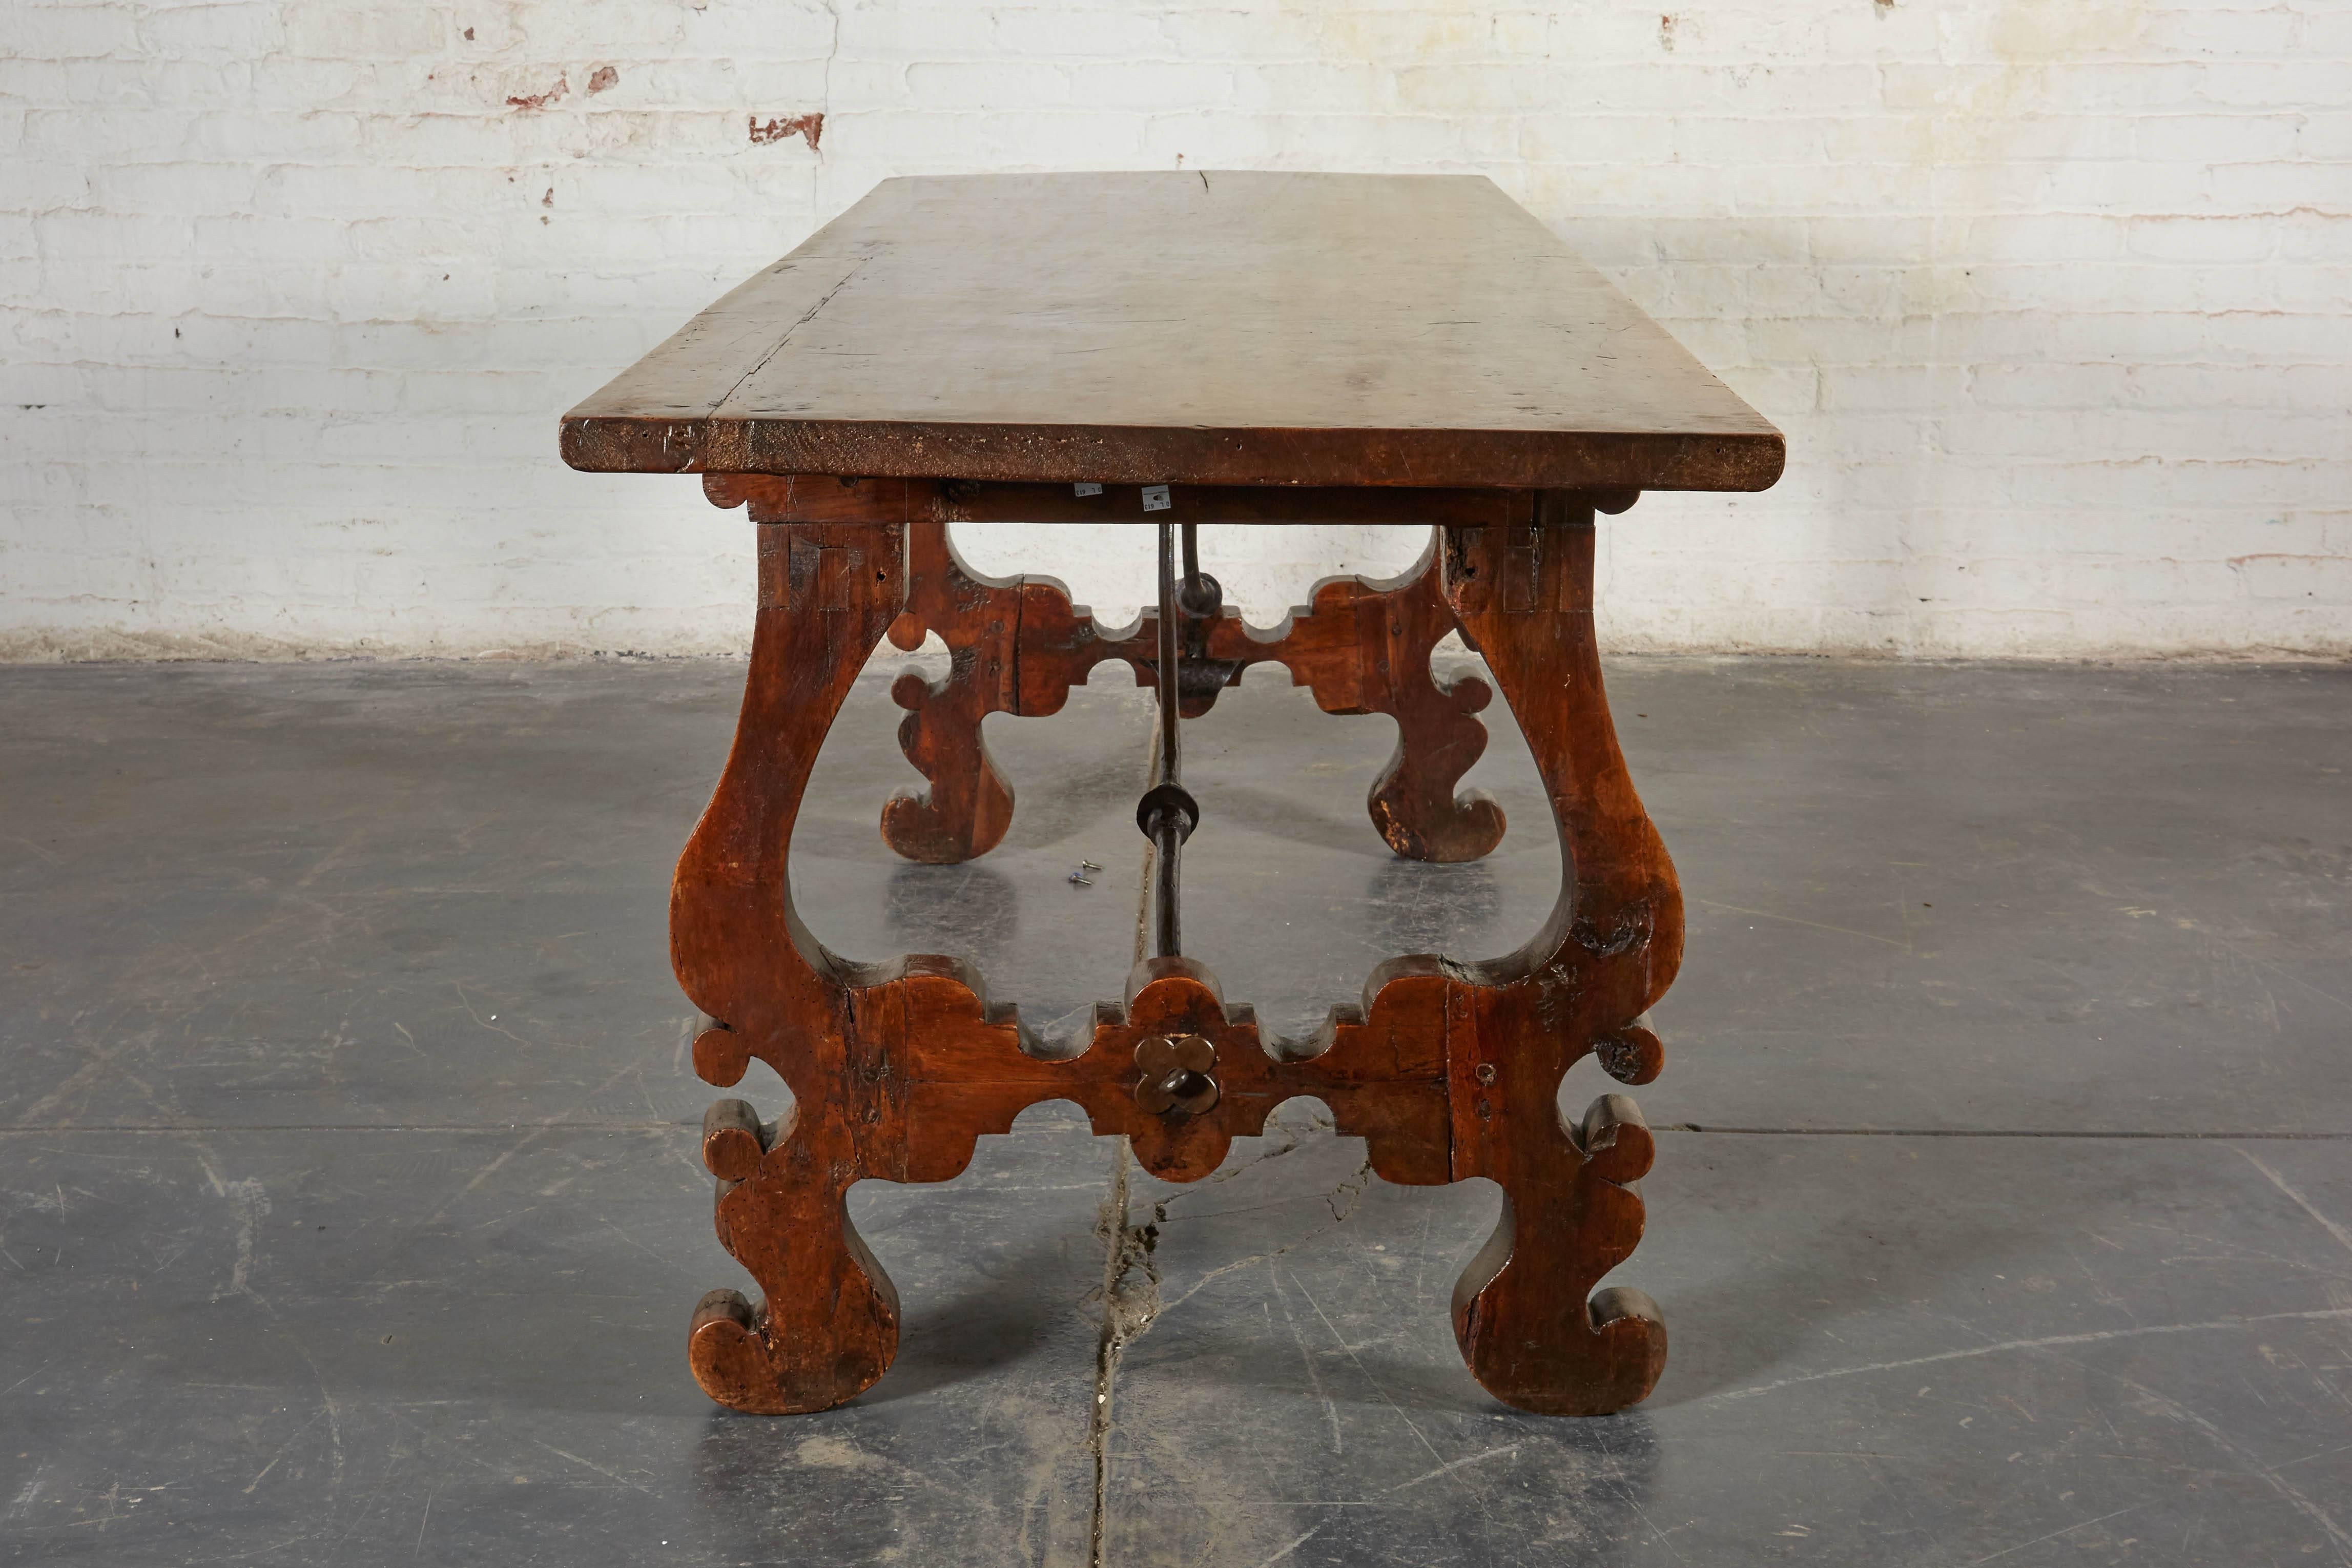 19th Century Spanish Baroque Walnut and Wrought-Iron Refectory Table